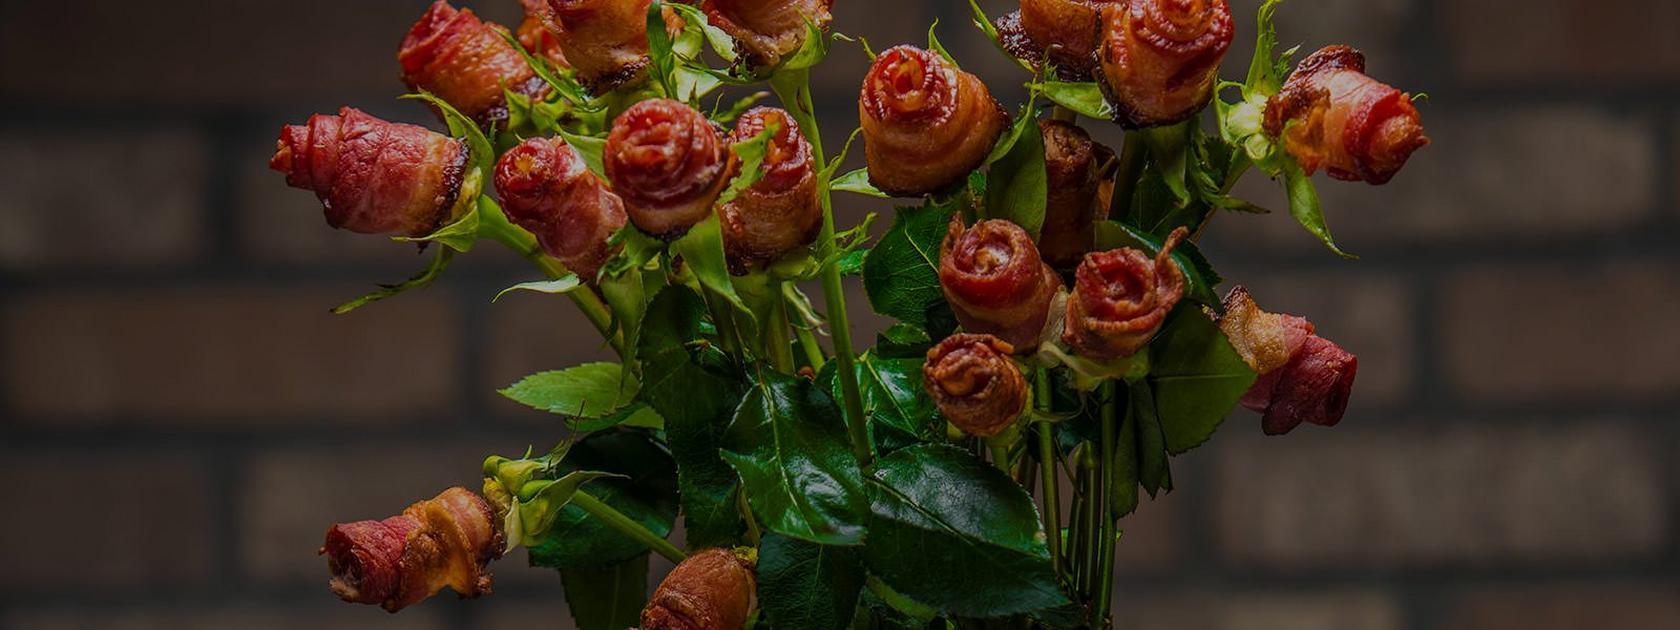 20180216_Bacon-Roses-How-To-Post_BG_HE